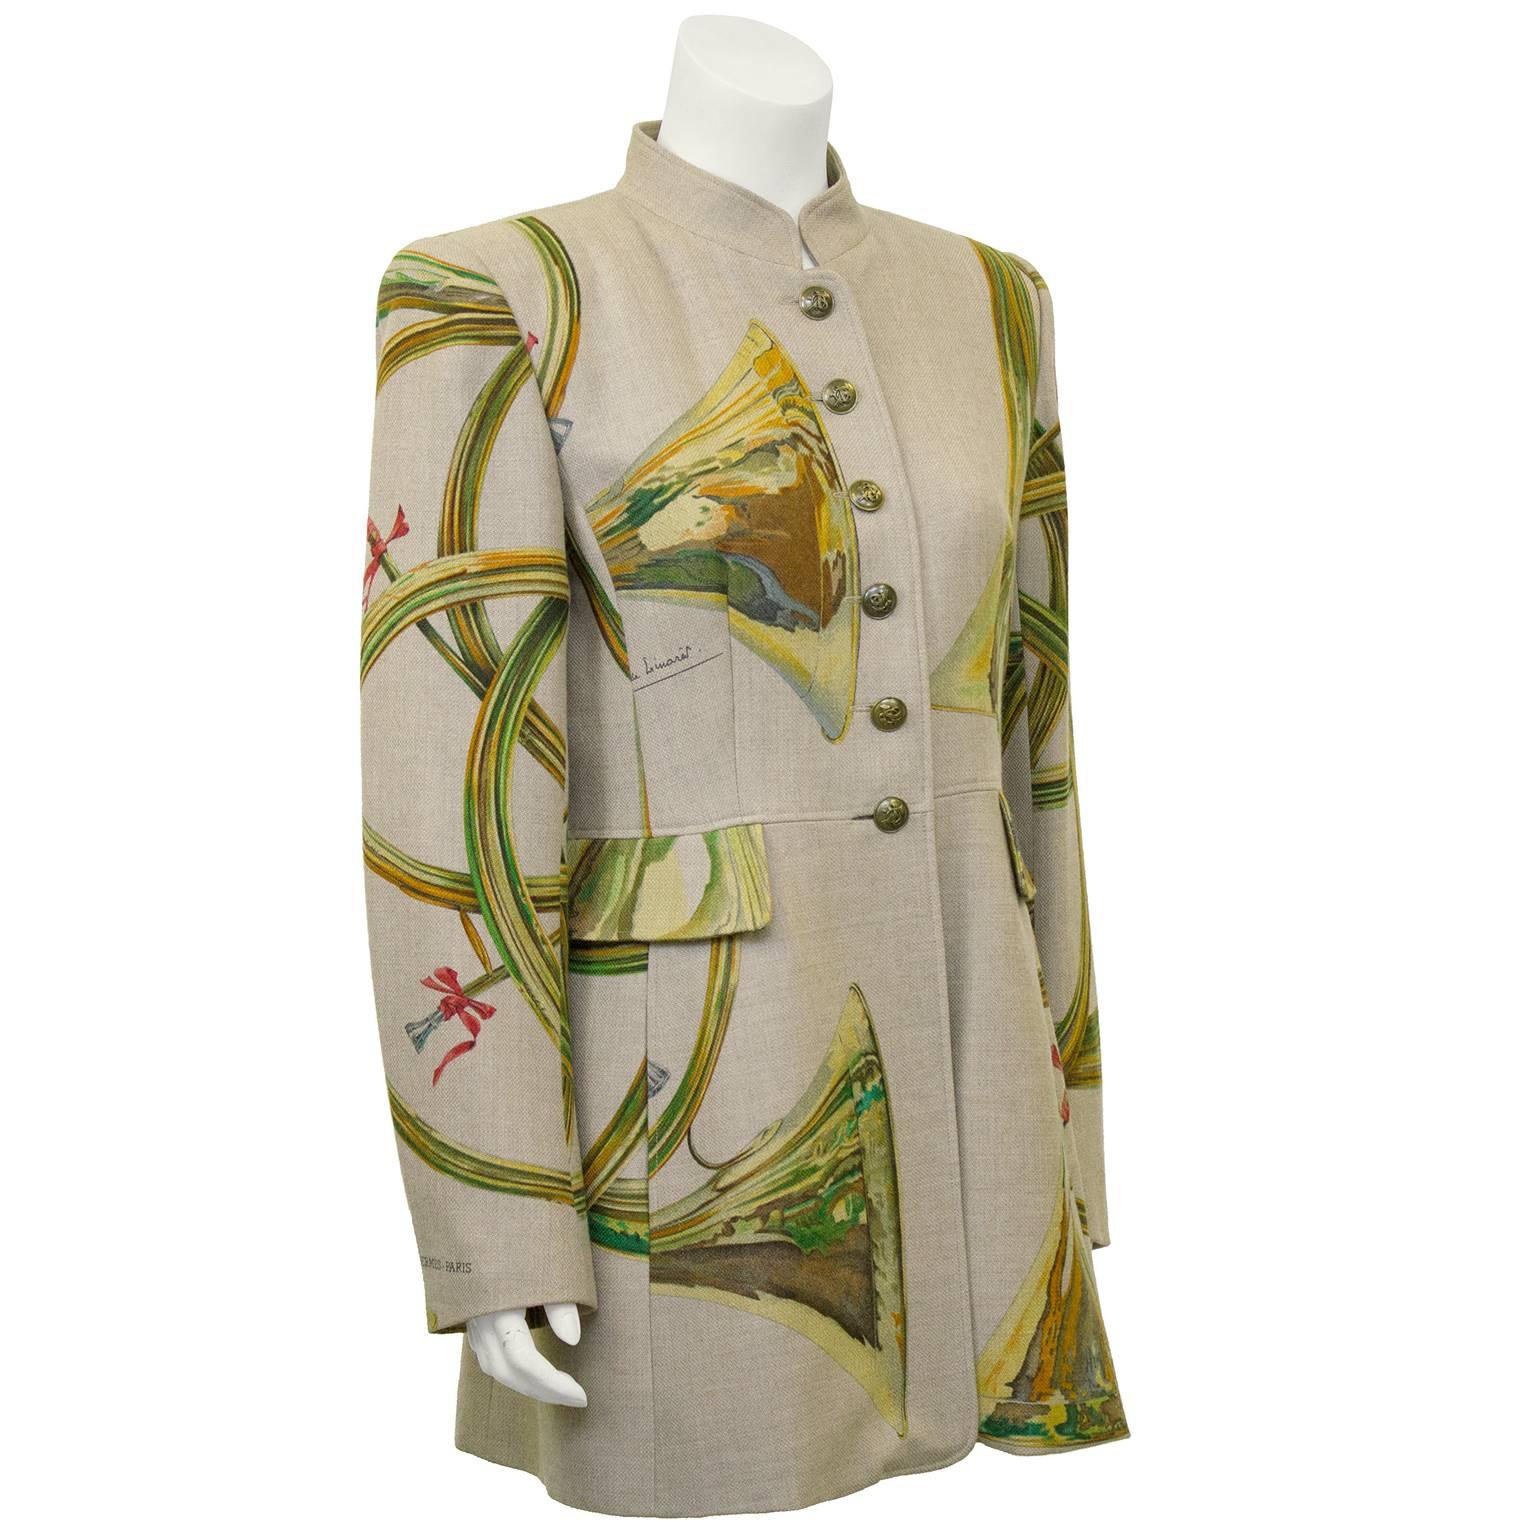 Stunning long fit military style Hermes jacket. Beautiful shape, stunning earth tone trumpet print with small pops of pink and Hermes marking stamped on sleeve. 80% wool, 20% cashmere. Beautiful brass buttons with trumpets corresponding to the